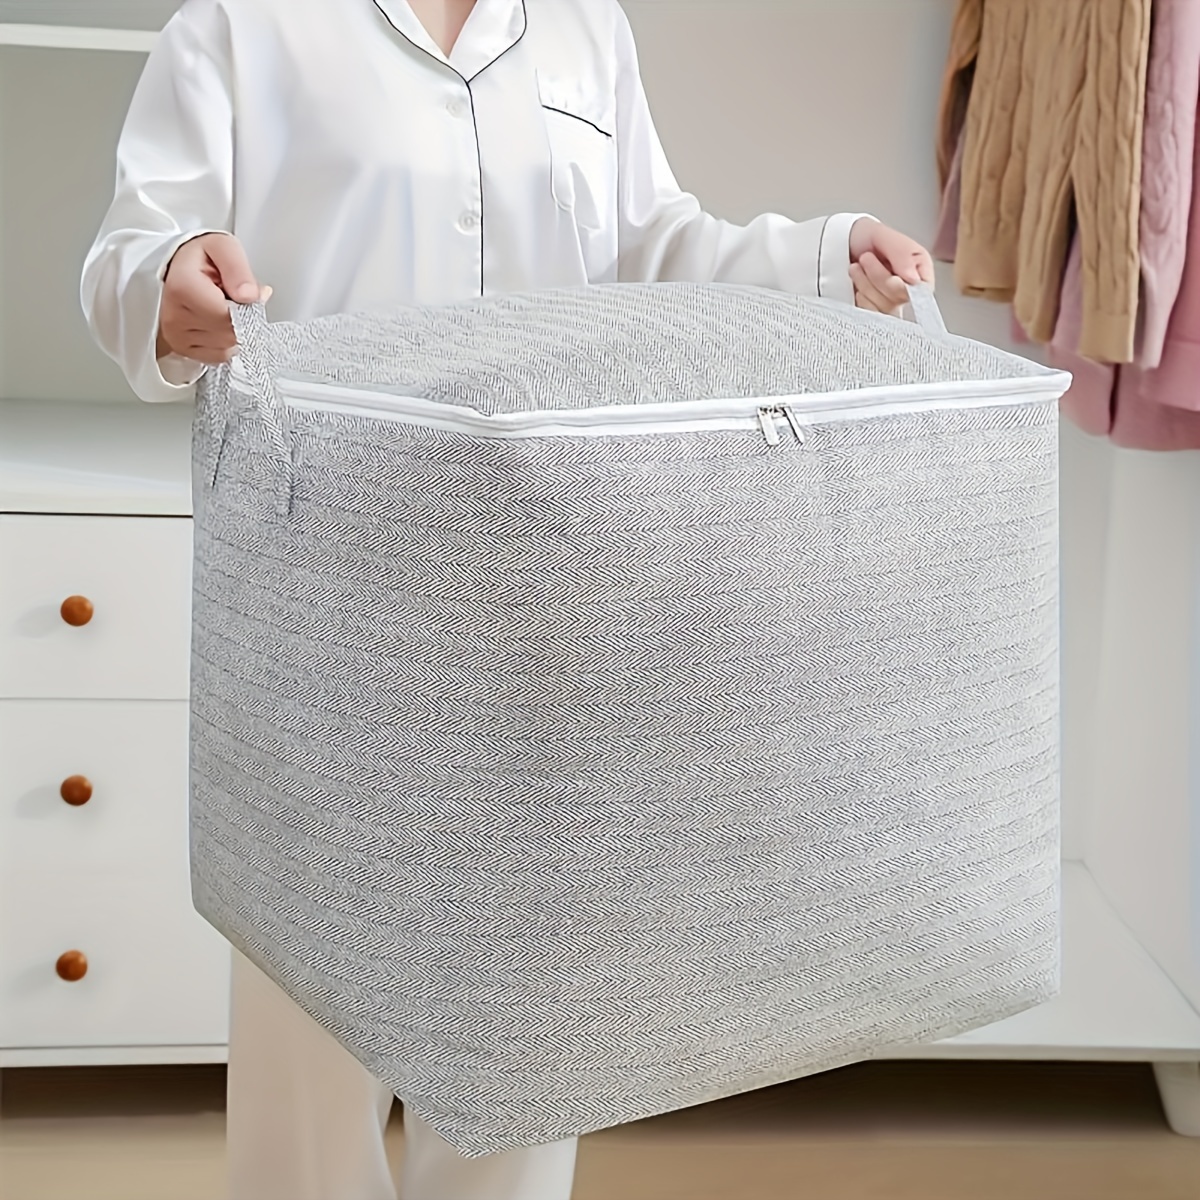 

Large Capacity Storage Bag For Clothes & Quilts - 30l/110l/150l/220l, Bohemian Style, Pvc, Rectangular, Non-waterproof, Multi-purpose Organizer For Moving & Travel